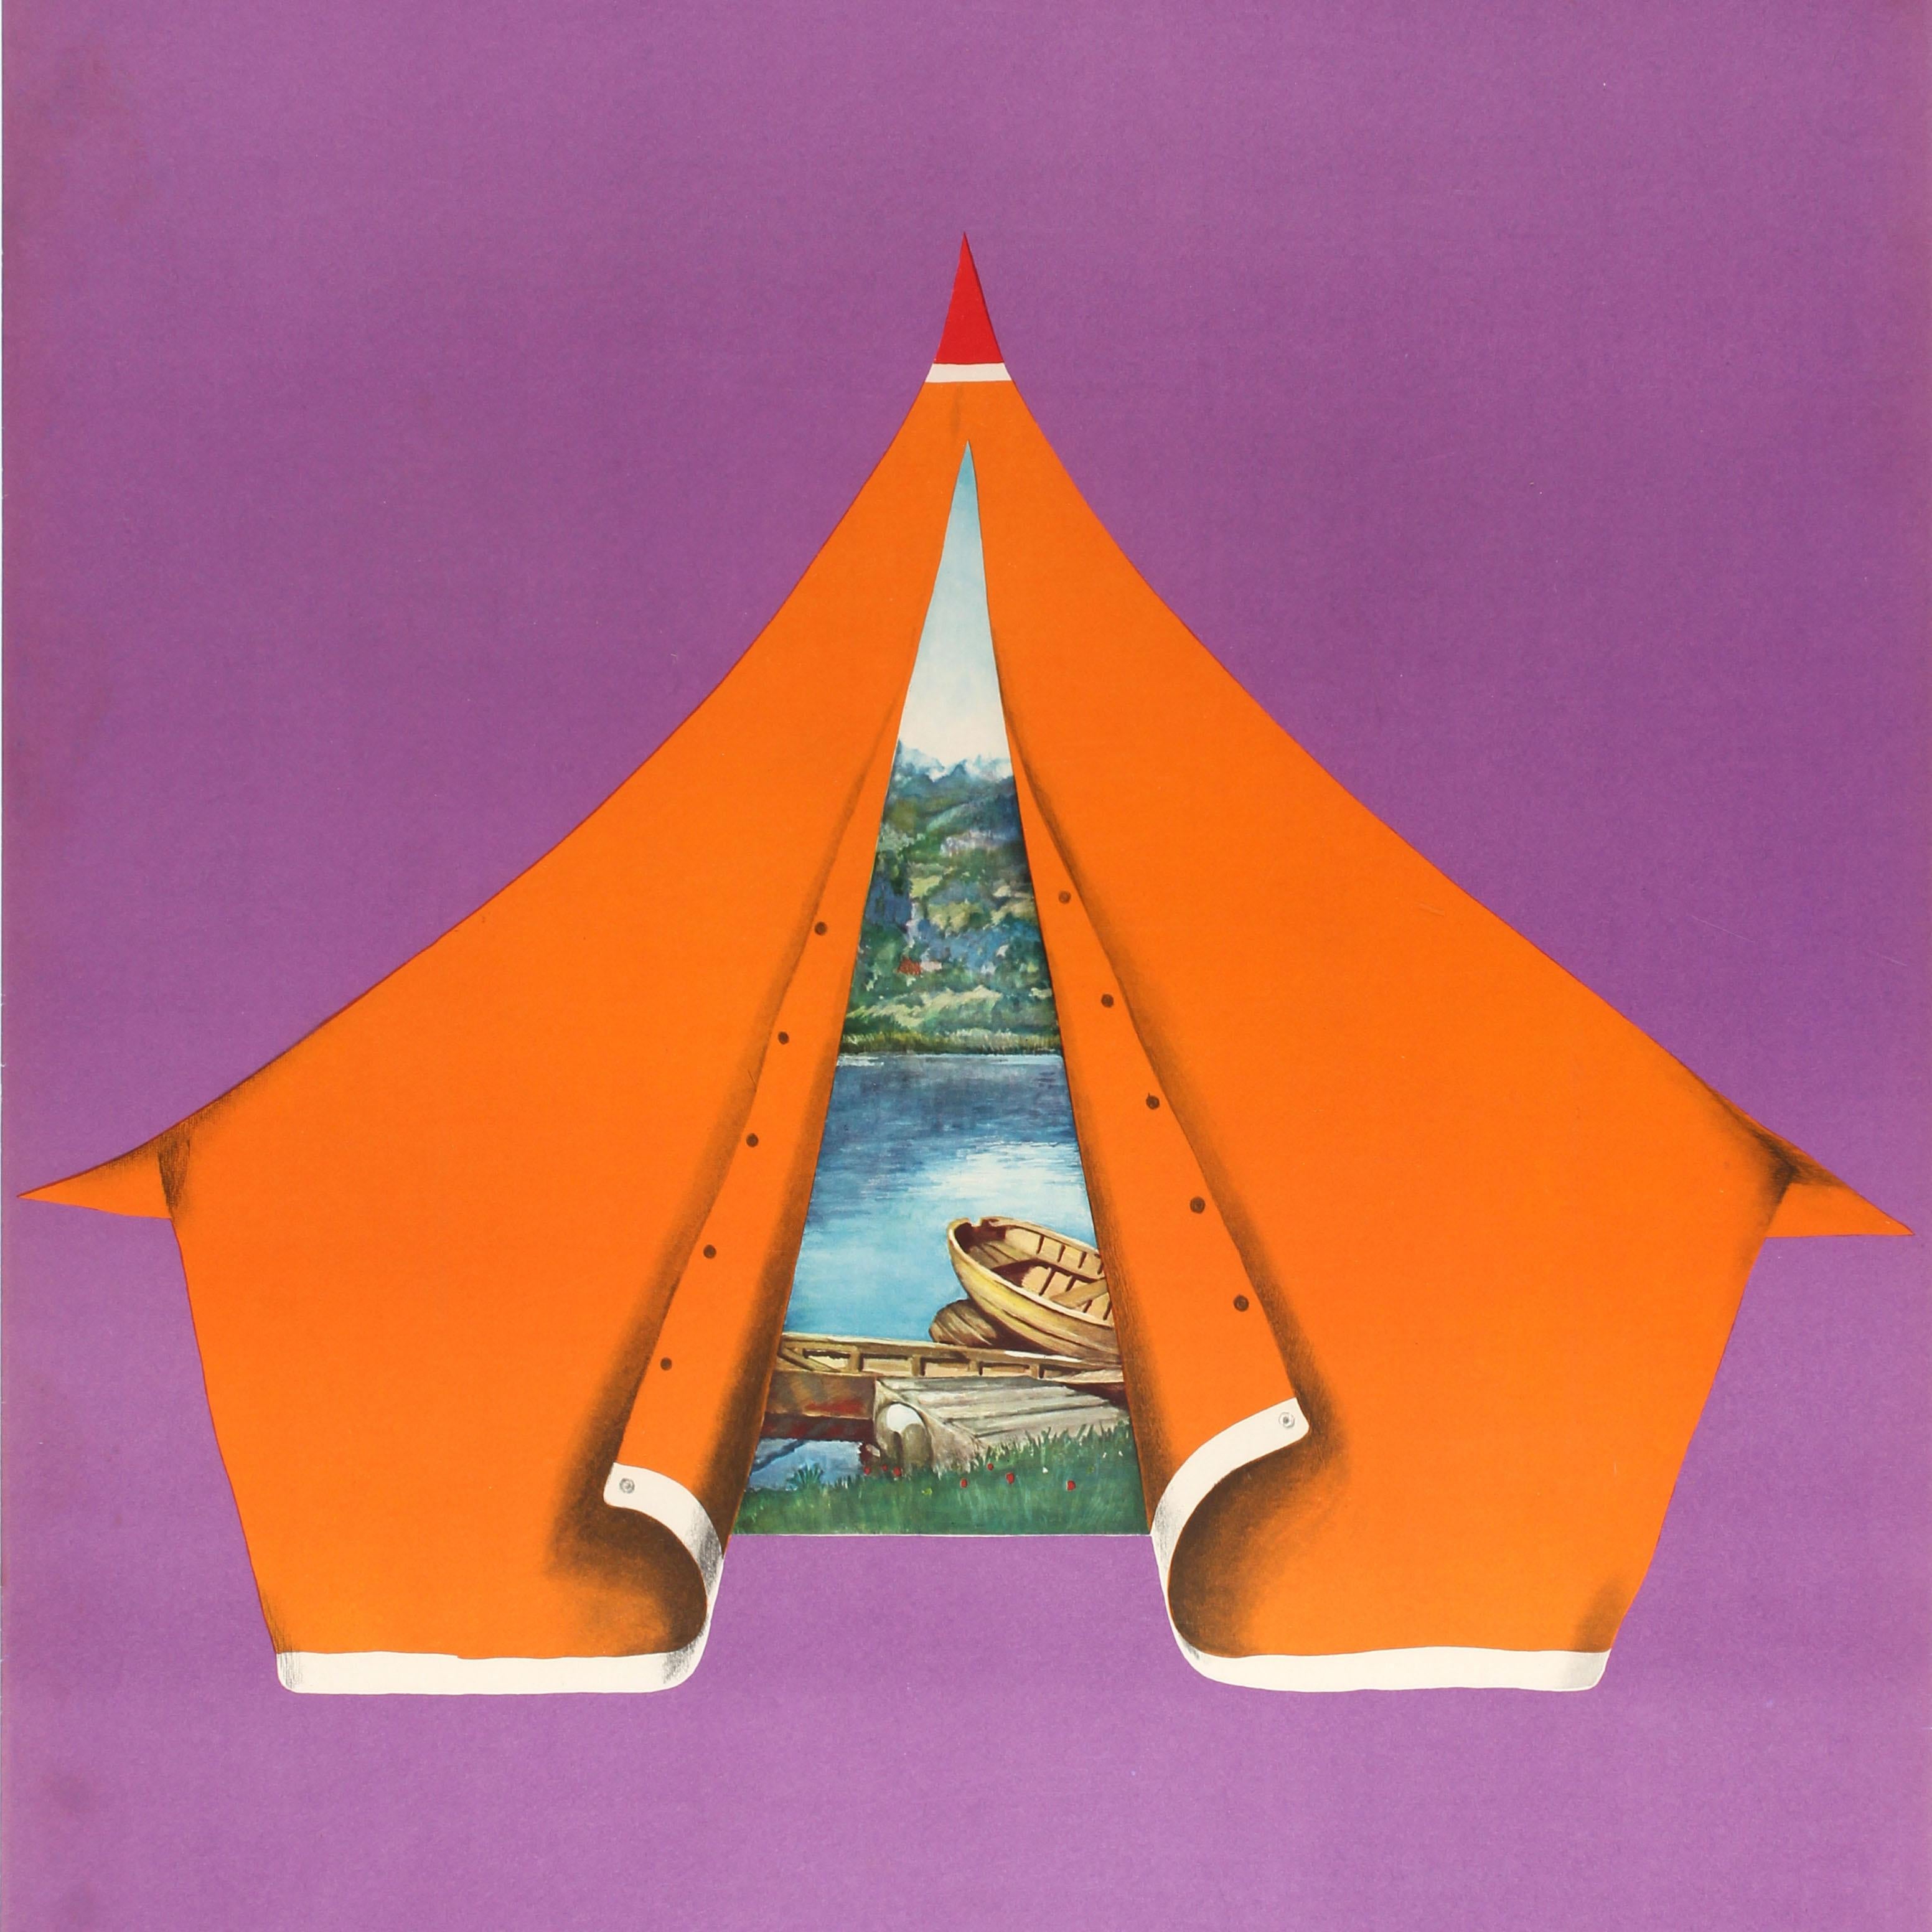 Original vintage travel poster - Poland Invites You for Camping - featuring a great design by the renowned Polish artist Maciej Urbaniec (1925-2004) showing a scenic view through an opening of an orange tent of wooden boats on a lake leading to